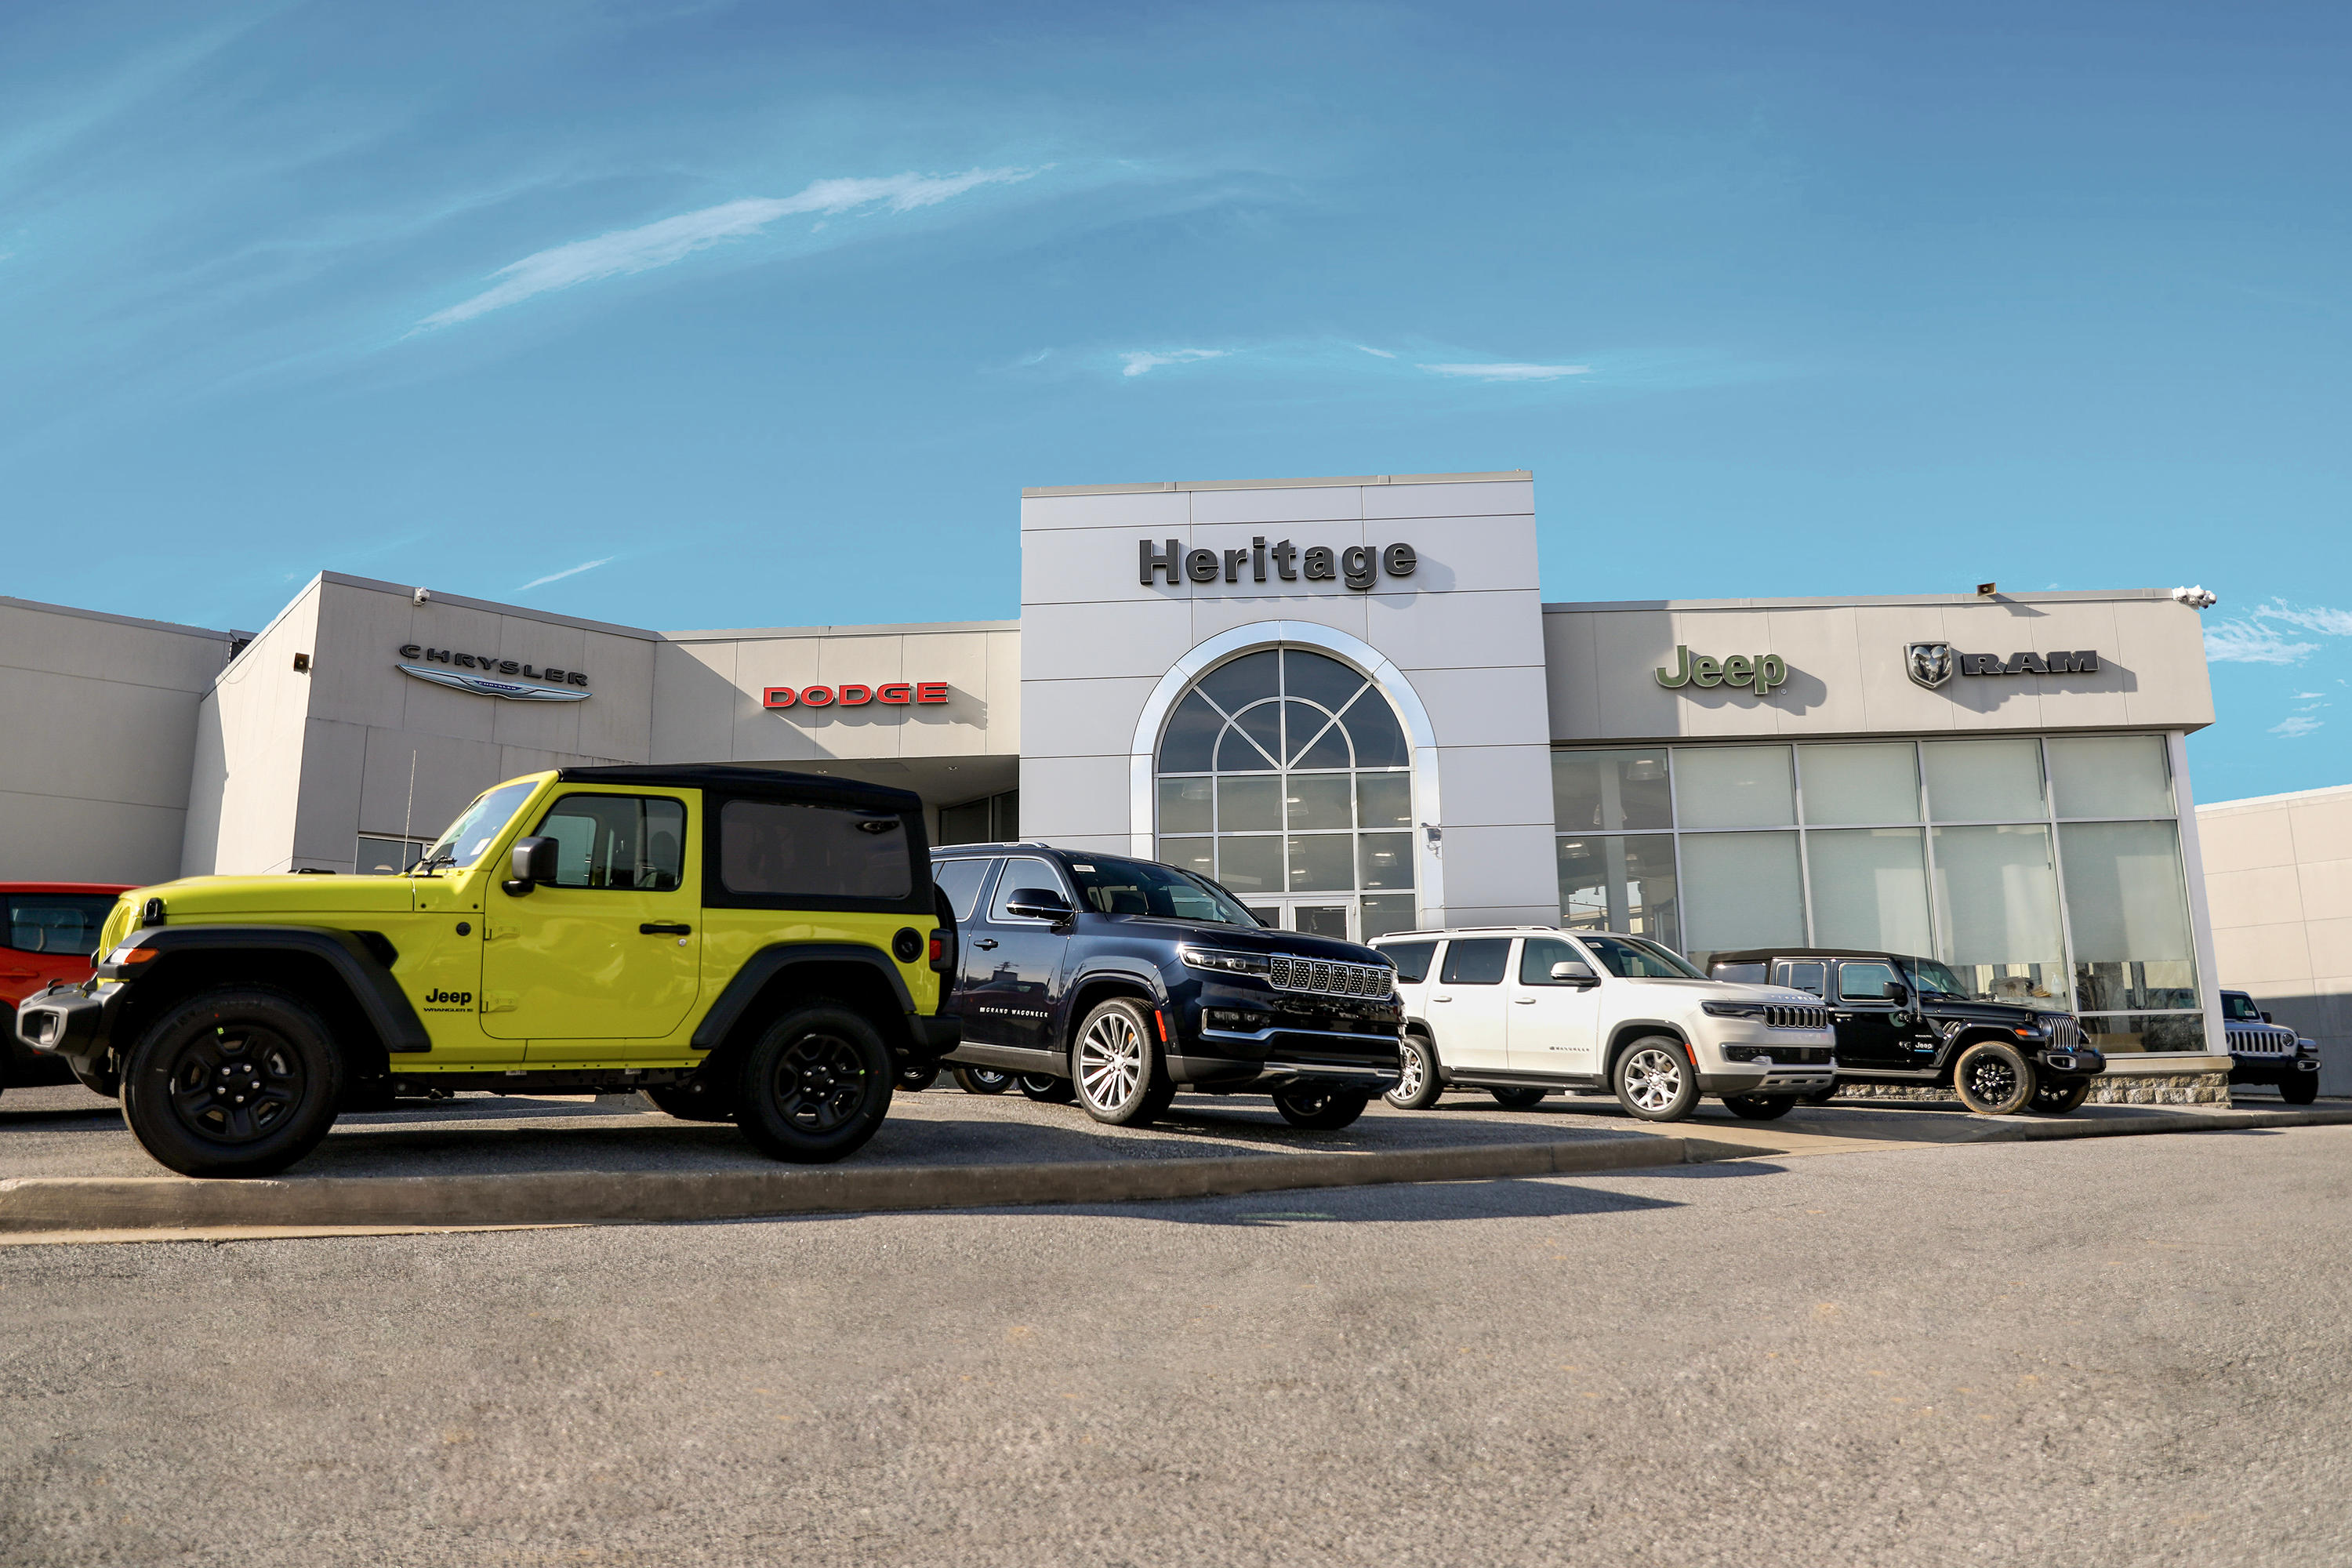 Heritage Chrysler Dodge Jeep RAM Owings Mills - Owings Mills, MD 21117 - (866)771-8050 | ShowMeLocal.com